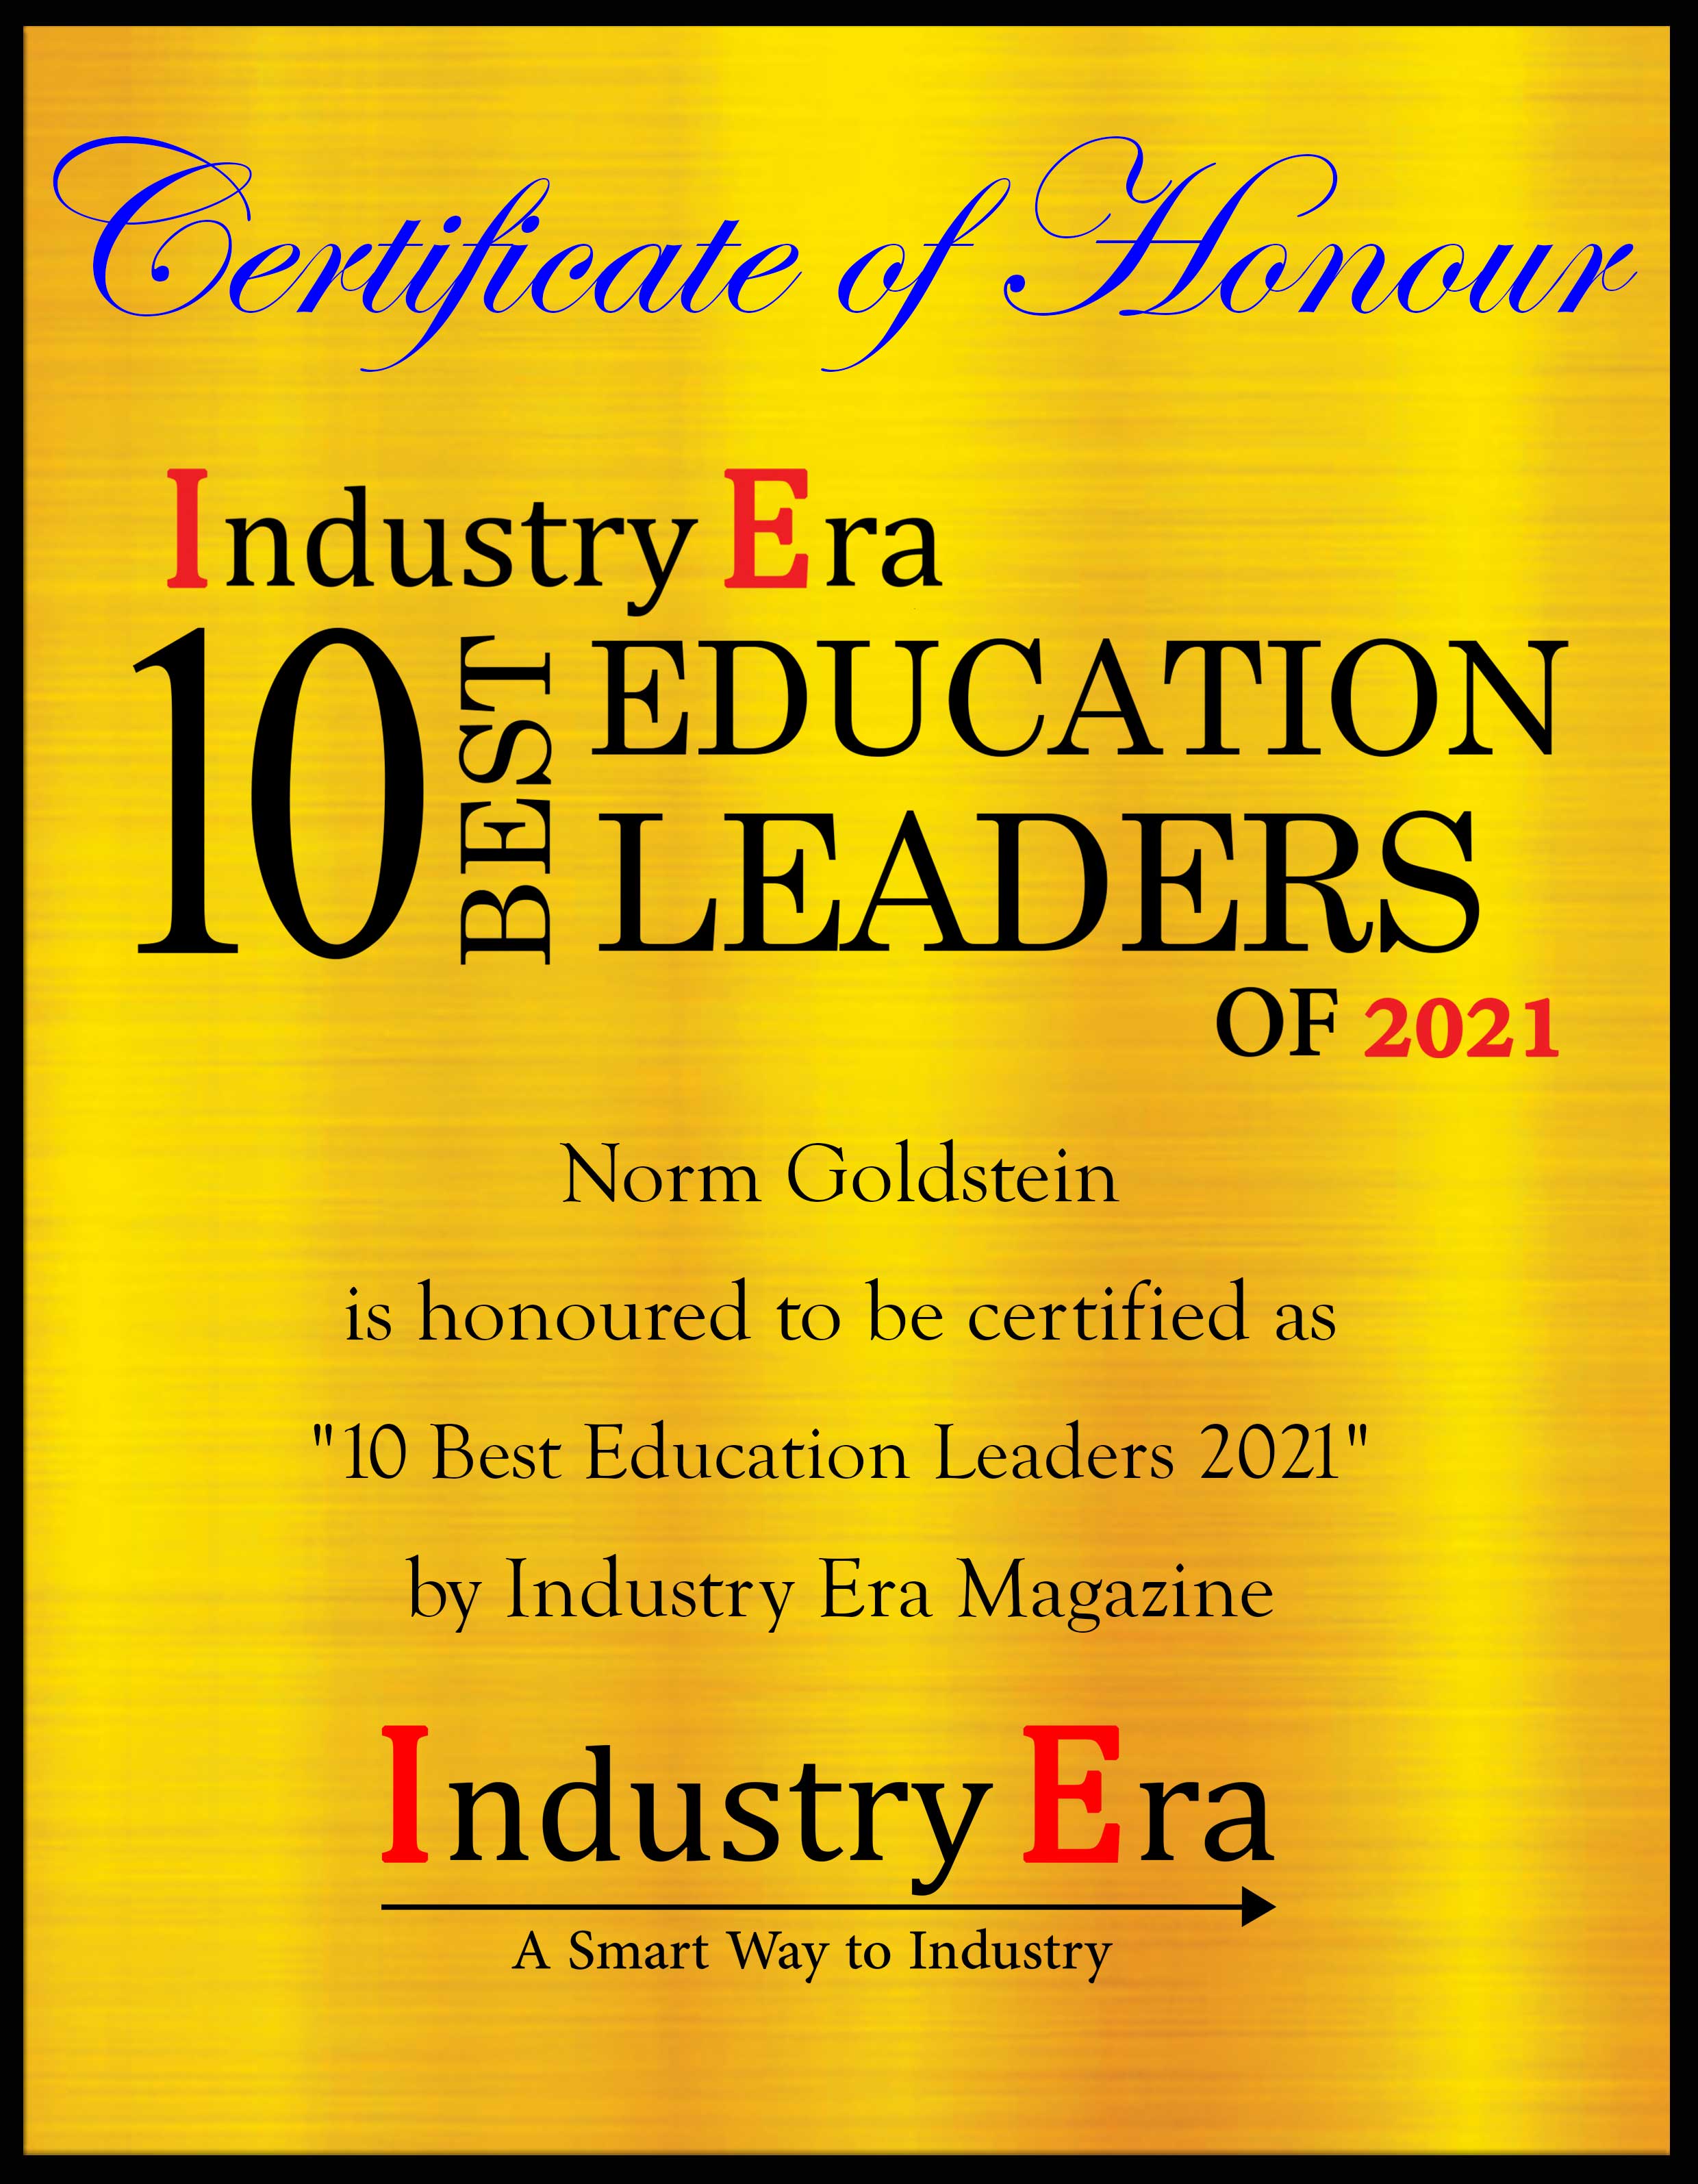 Norm Goldstein, Founder and CEO of EduNetwork Partners Certificate